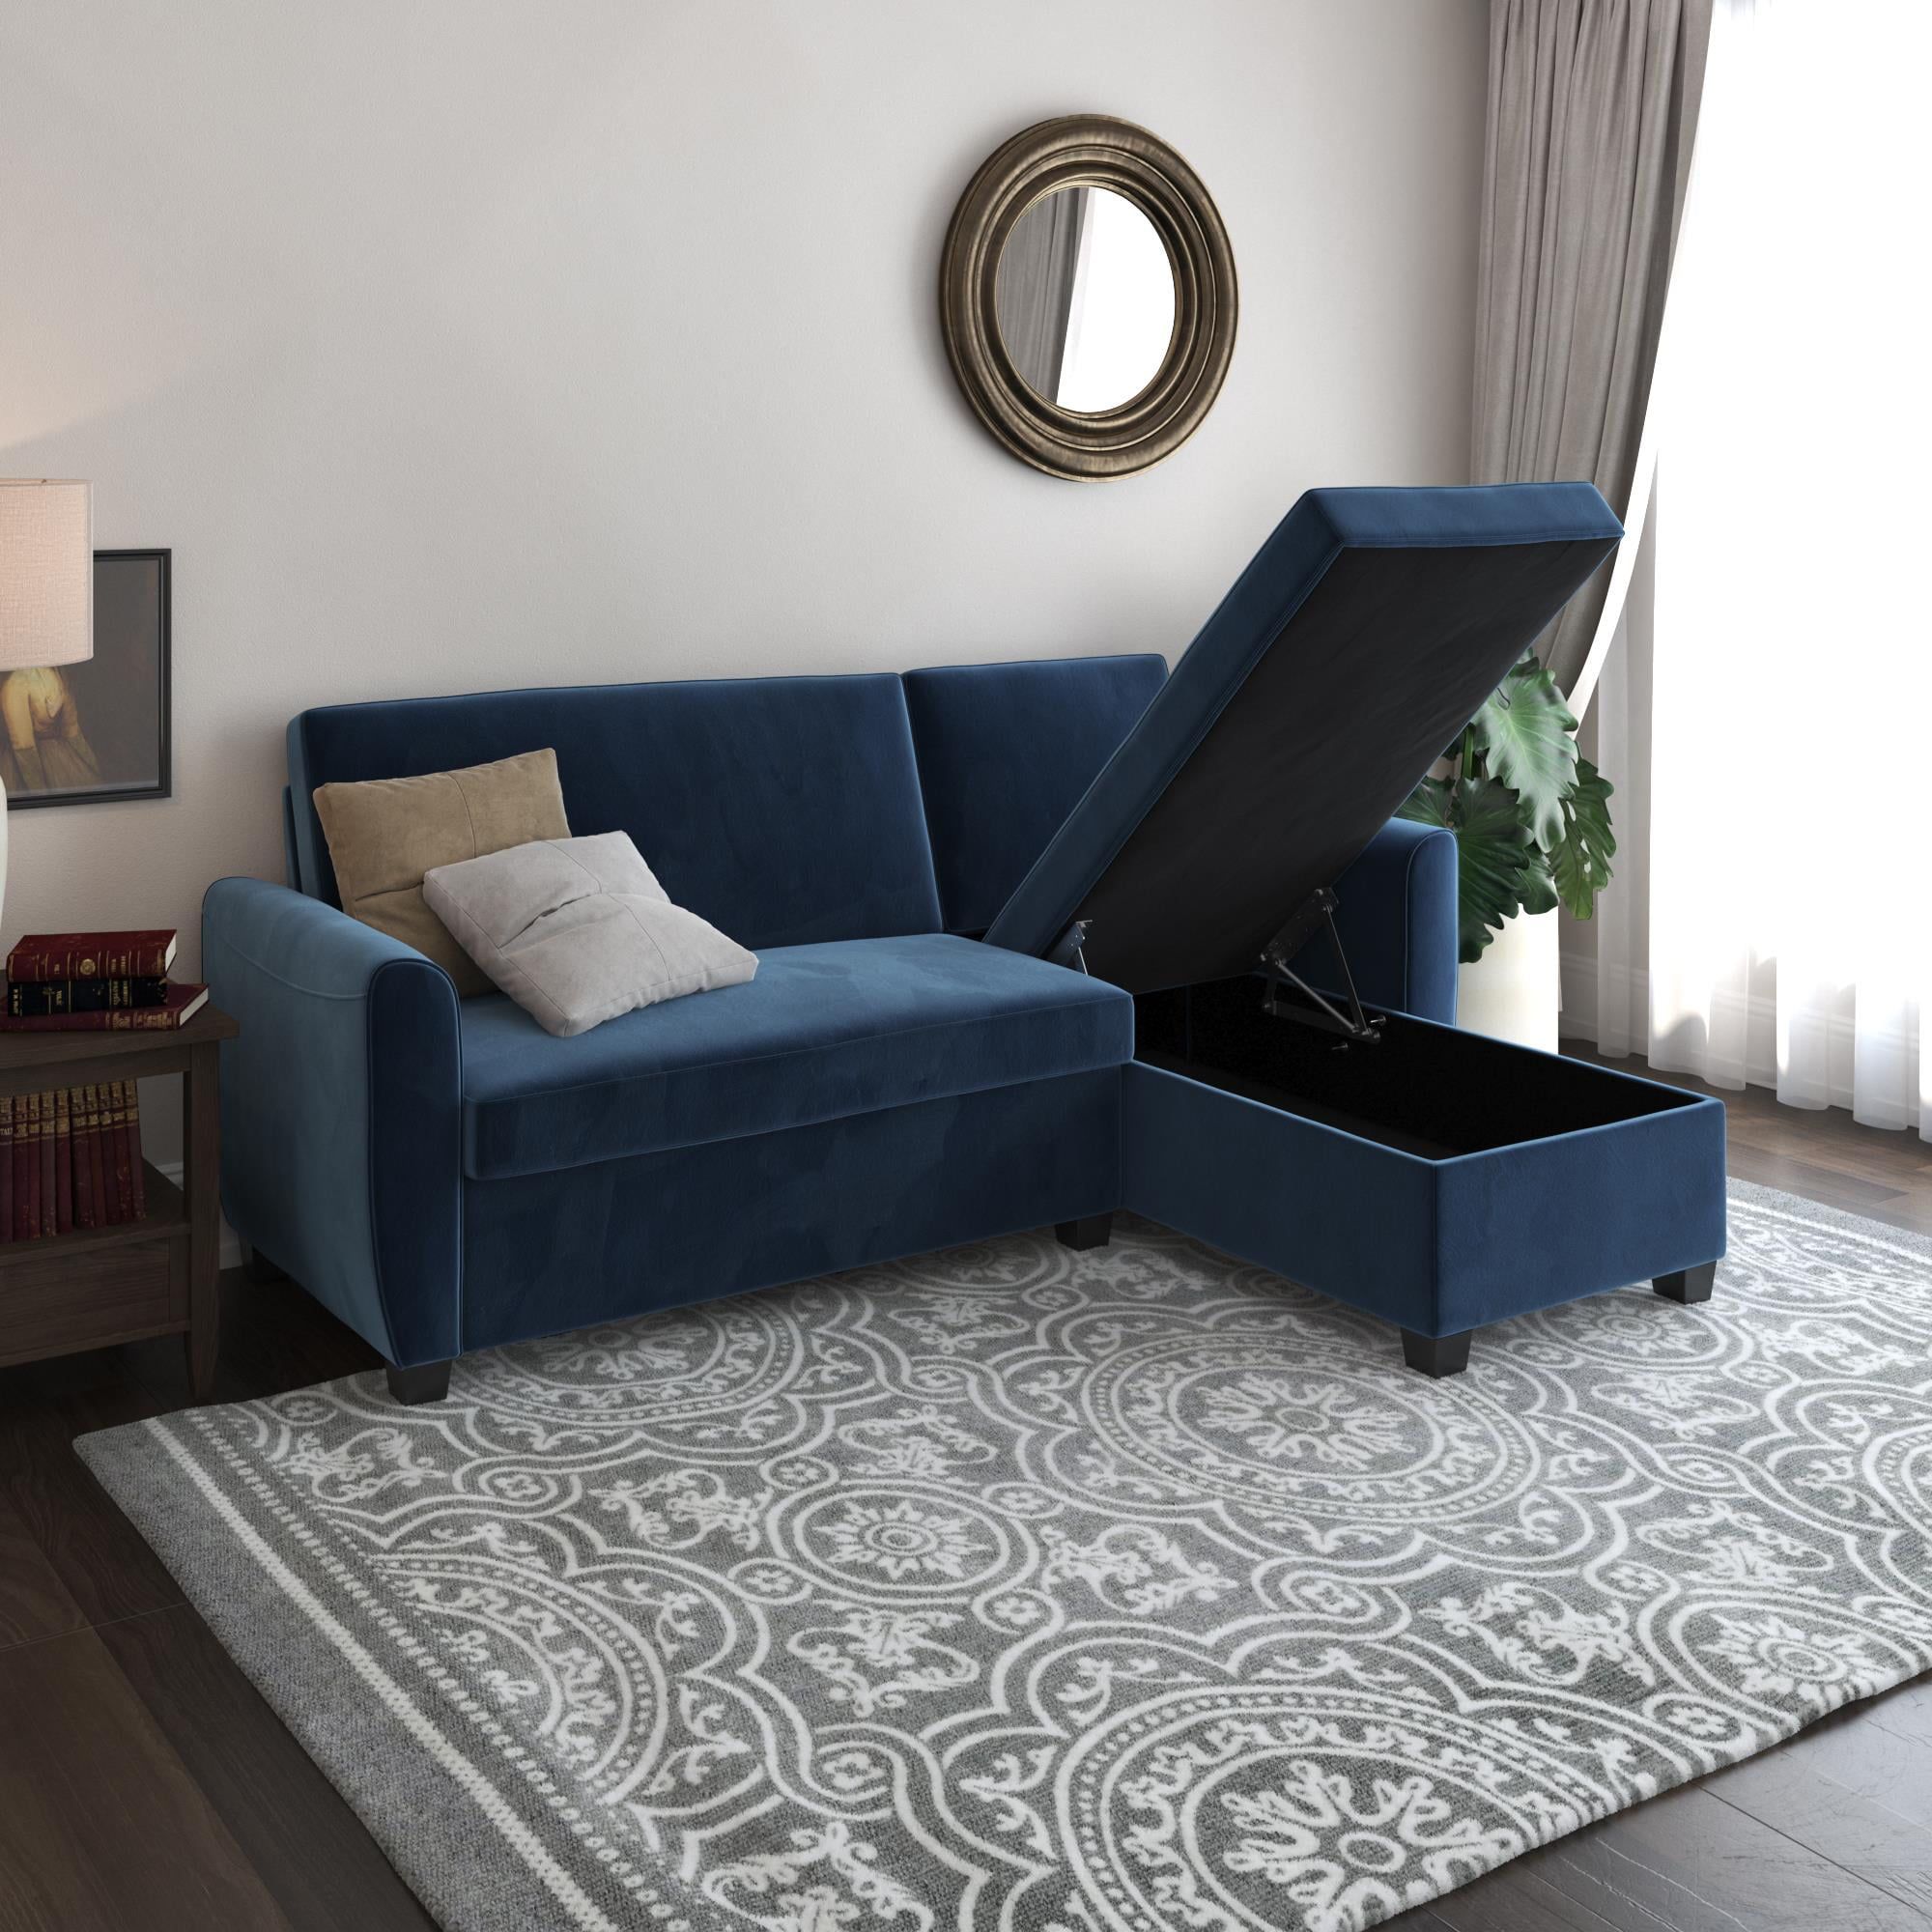 Dhp Noah Sectional Sofa Bed With Storage, Twin Frame, Dark Blue Velvet Pertaining To Modern Velvet Sofa Recliners With Storage (Gallery 18 of 20)